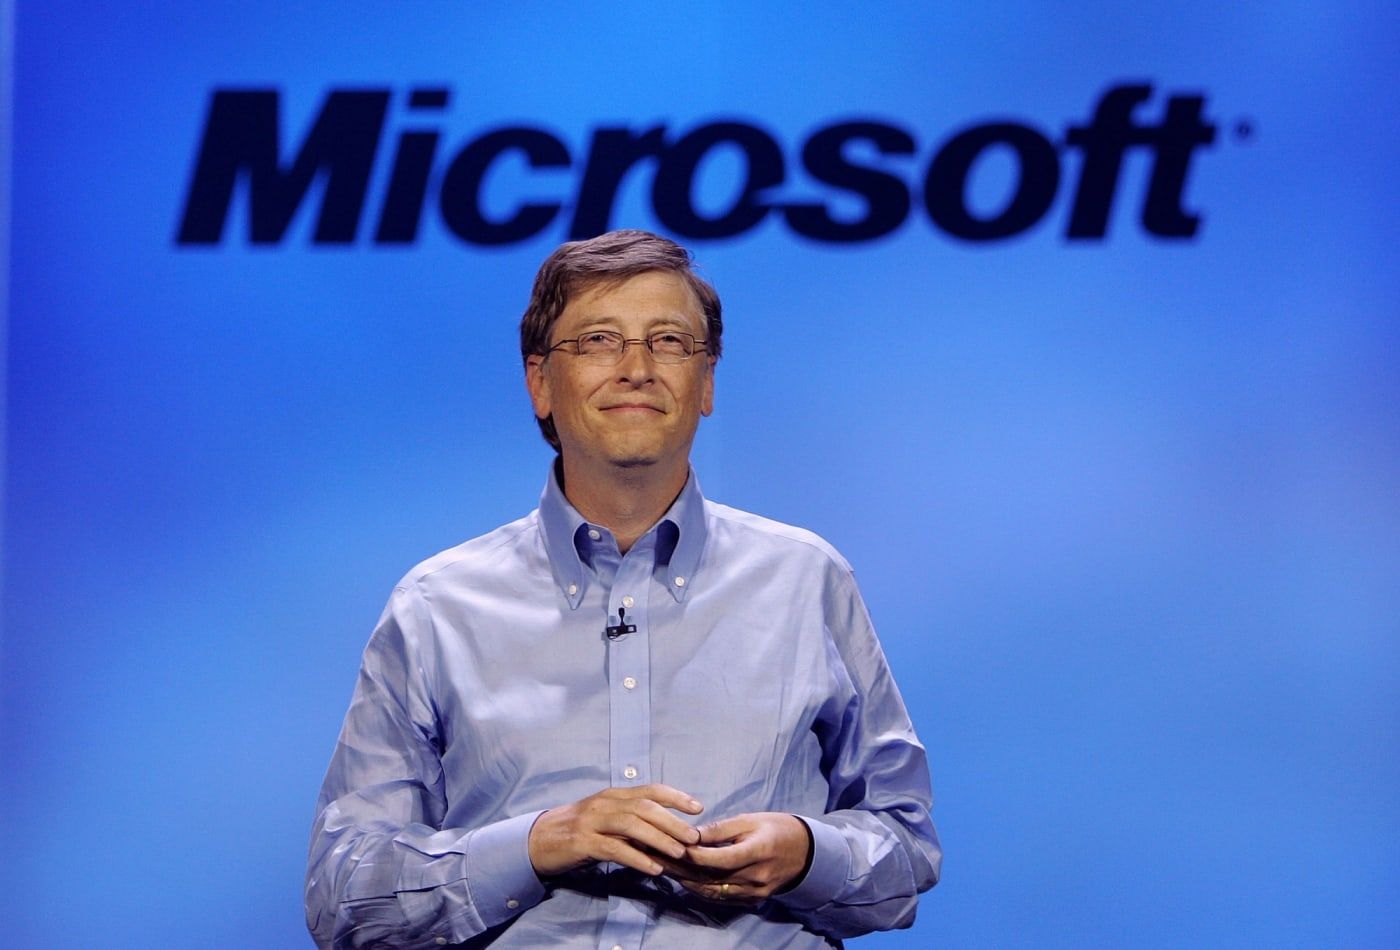 Bill Gates introduces a new software product at Microsoft